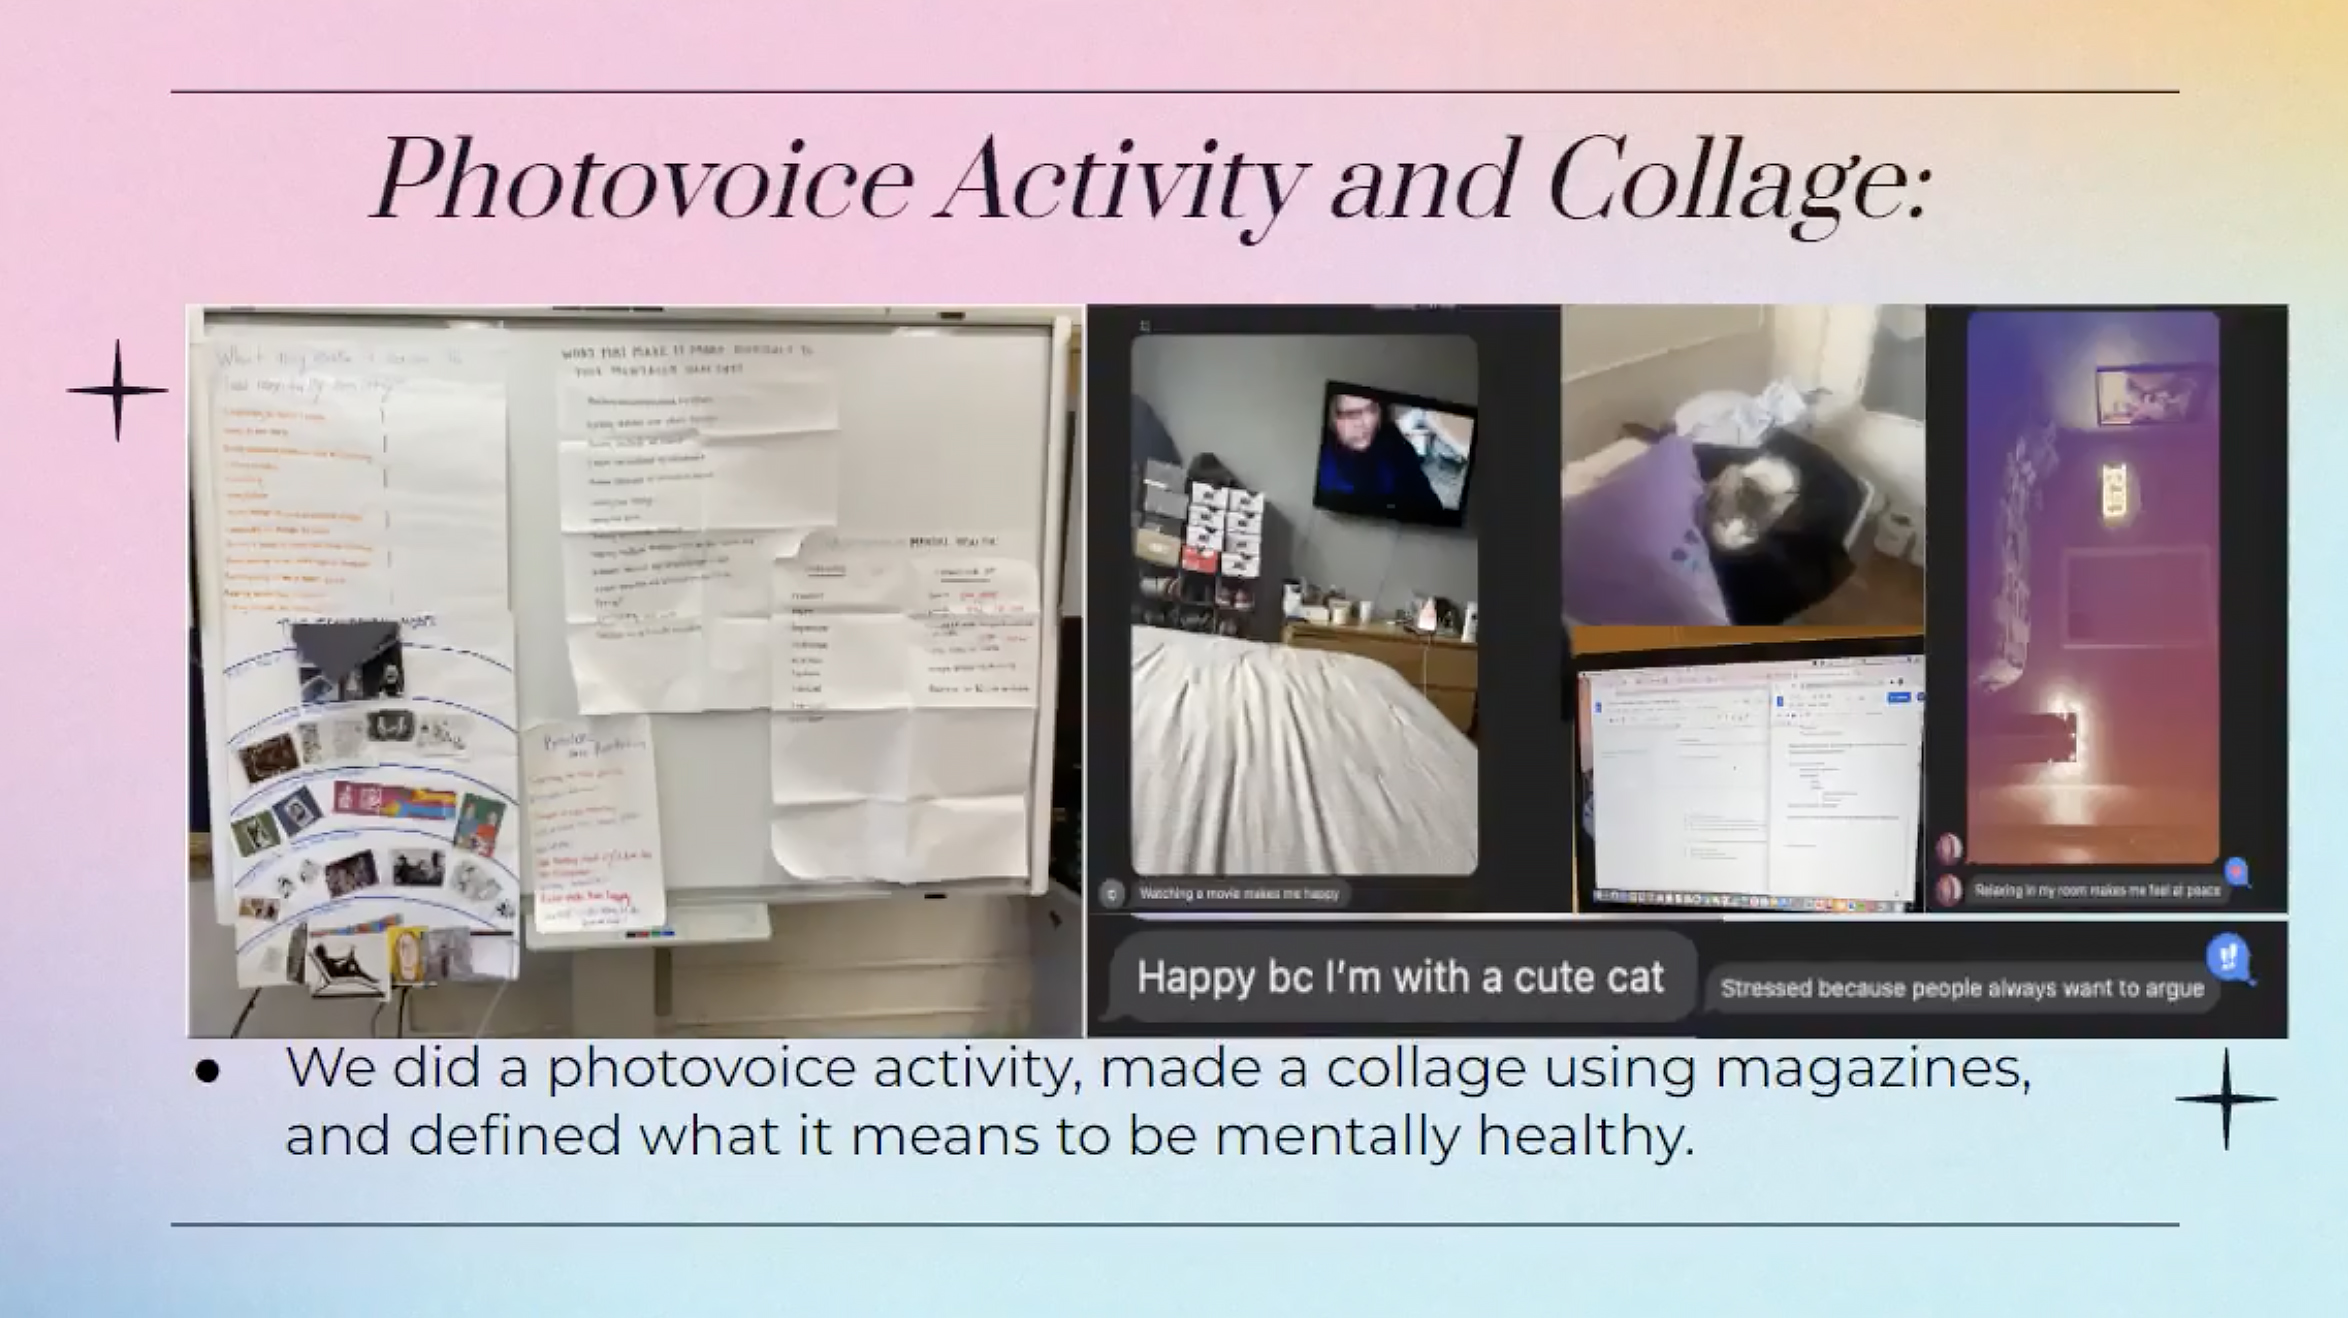 Text says: Photovoice Activity and Collage: We did a photovoice activity, made a collage using magazines, and defined what it means to be mentally healthy. Images show a poster with tacked on notes and pictures, and images of a room that say "happy bc I'm with a cute cat"